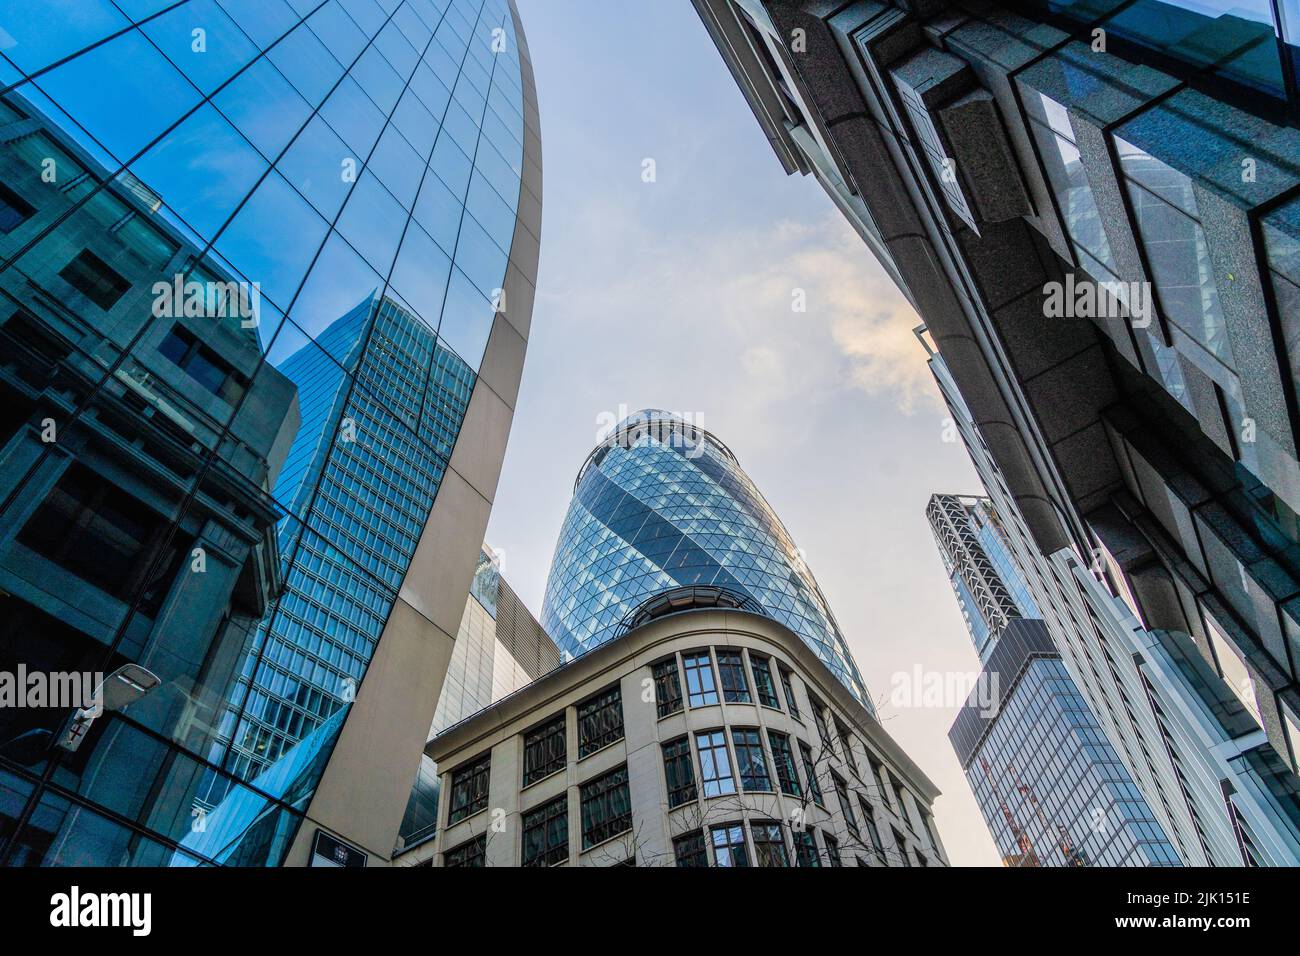 Architectural detail including The Gherkin, City of London, London, England, United Kingdom, Europe Stock Photo